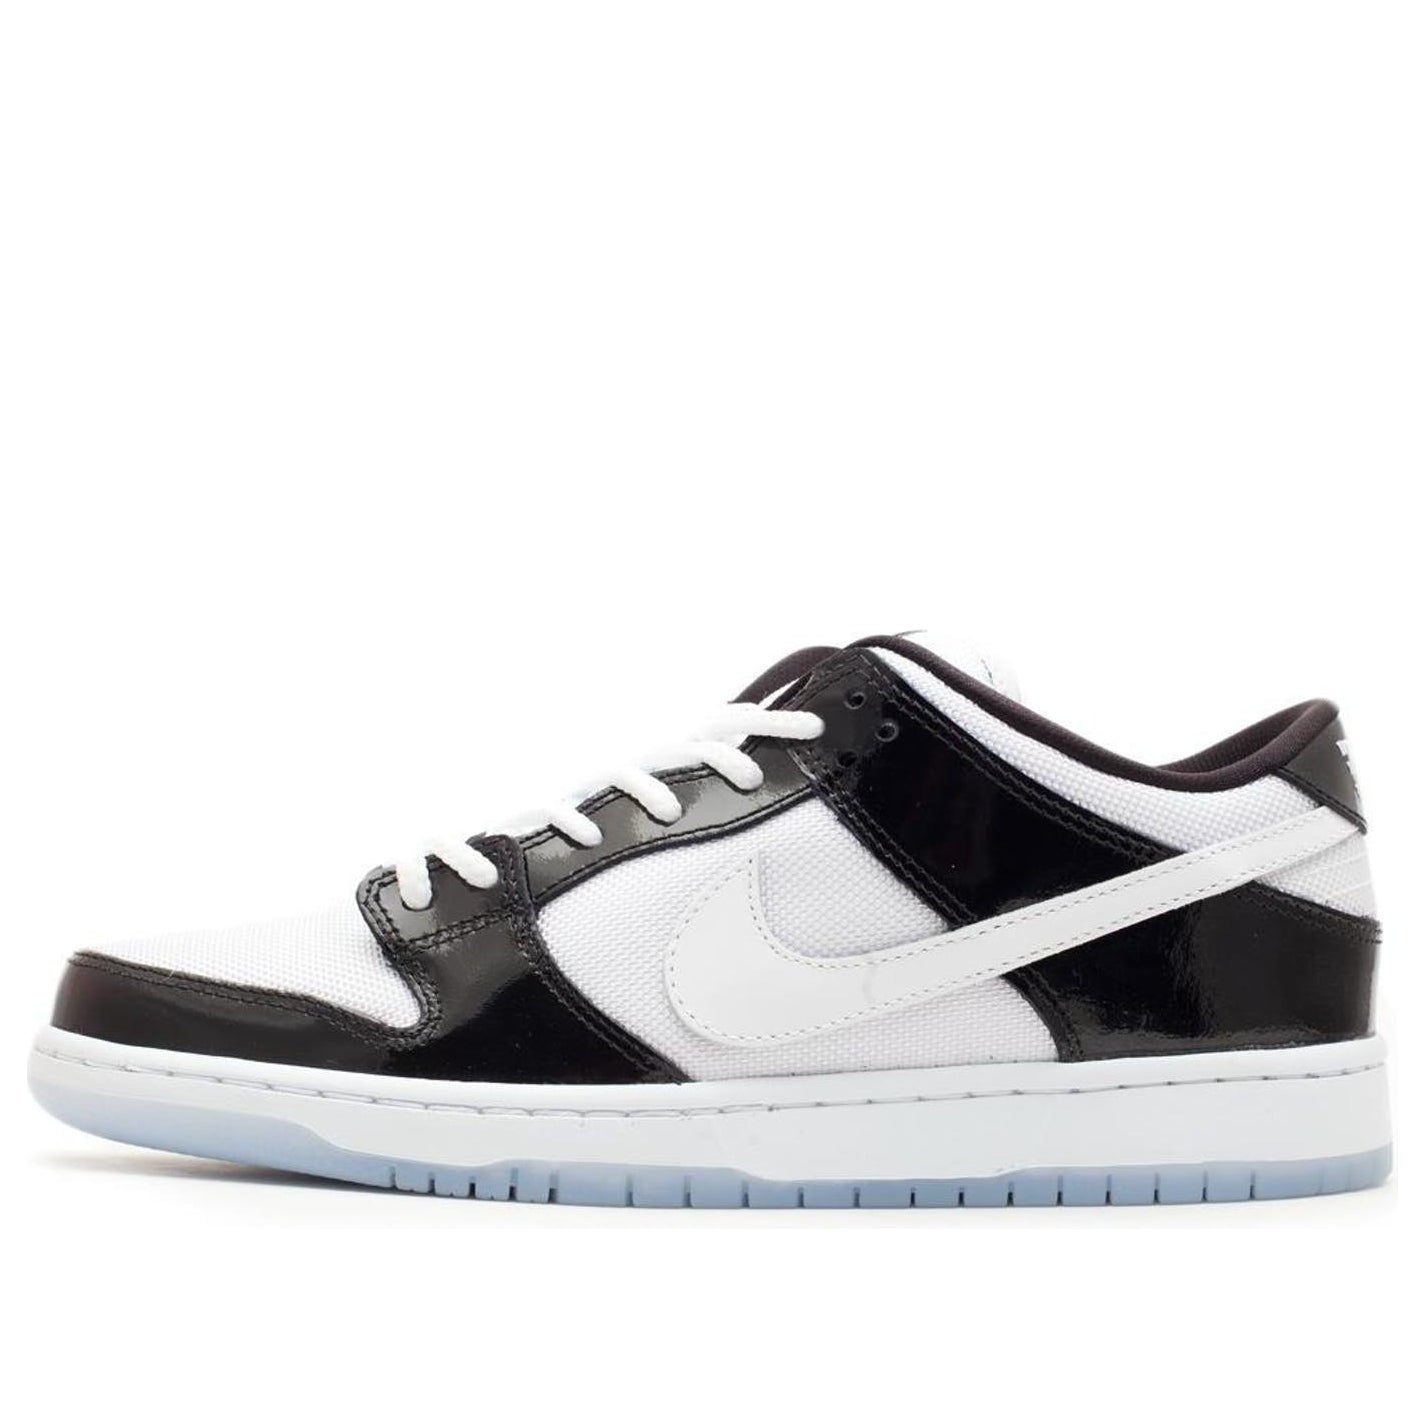 Nike Dunk Low Pro SB 'Concord'  304292-043 Antique Icons